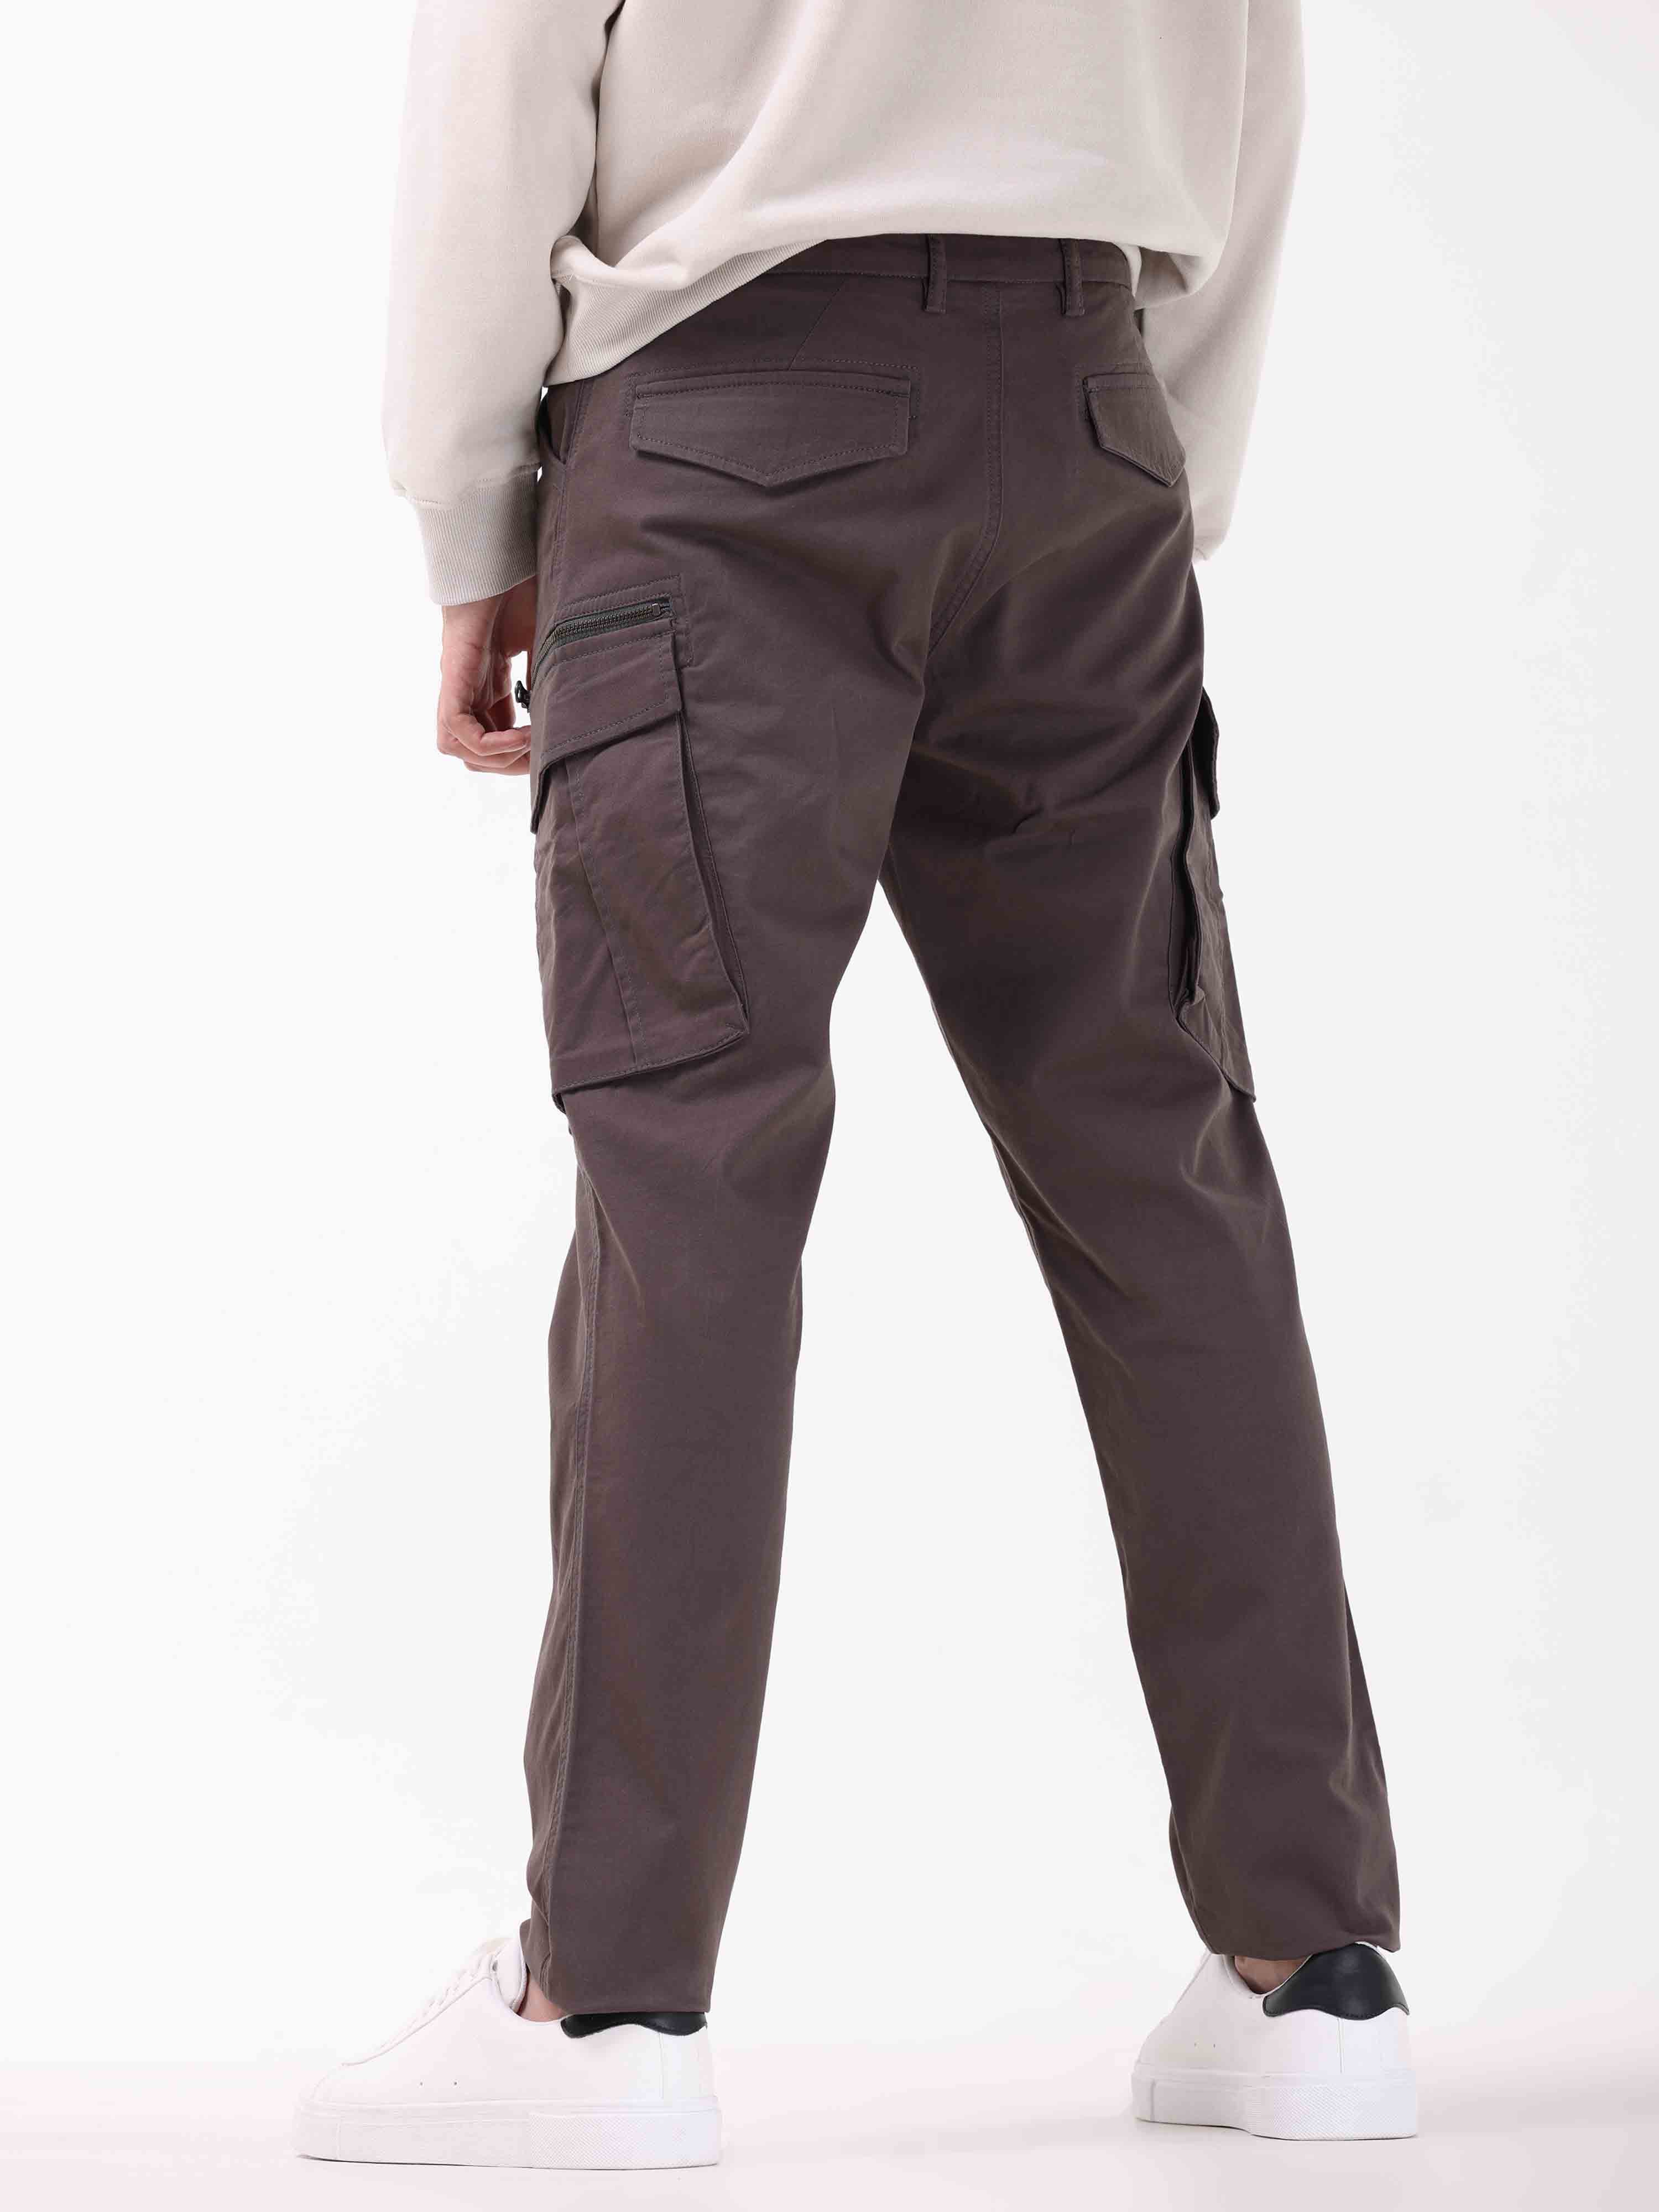 Cargo Trousers & Pants in the color brown for Men on sale | FASHIOLA INDIA